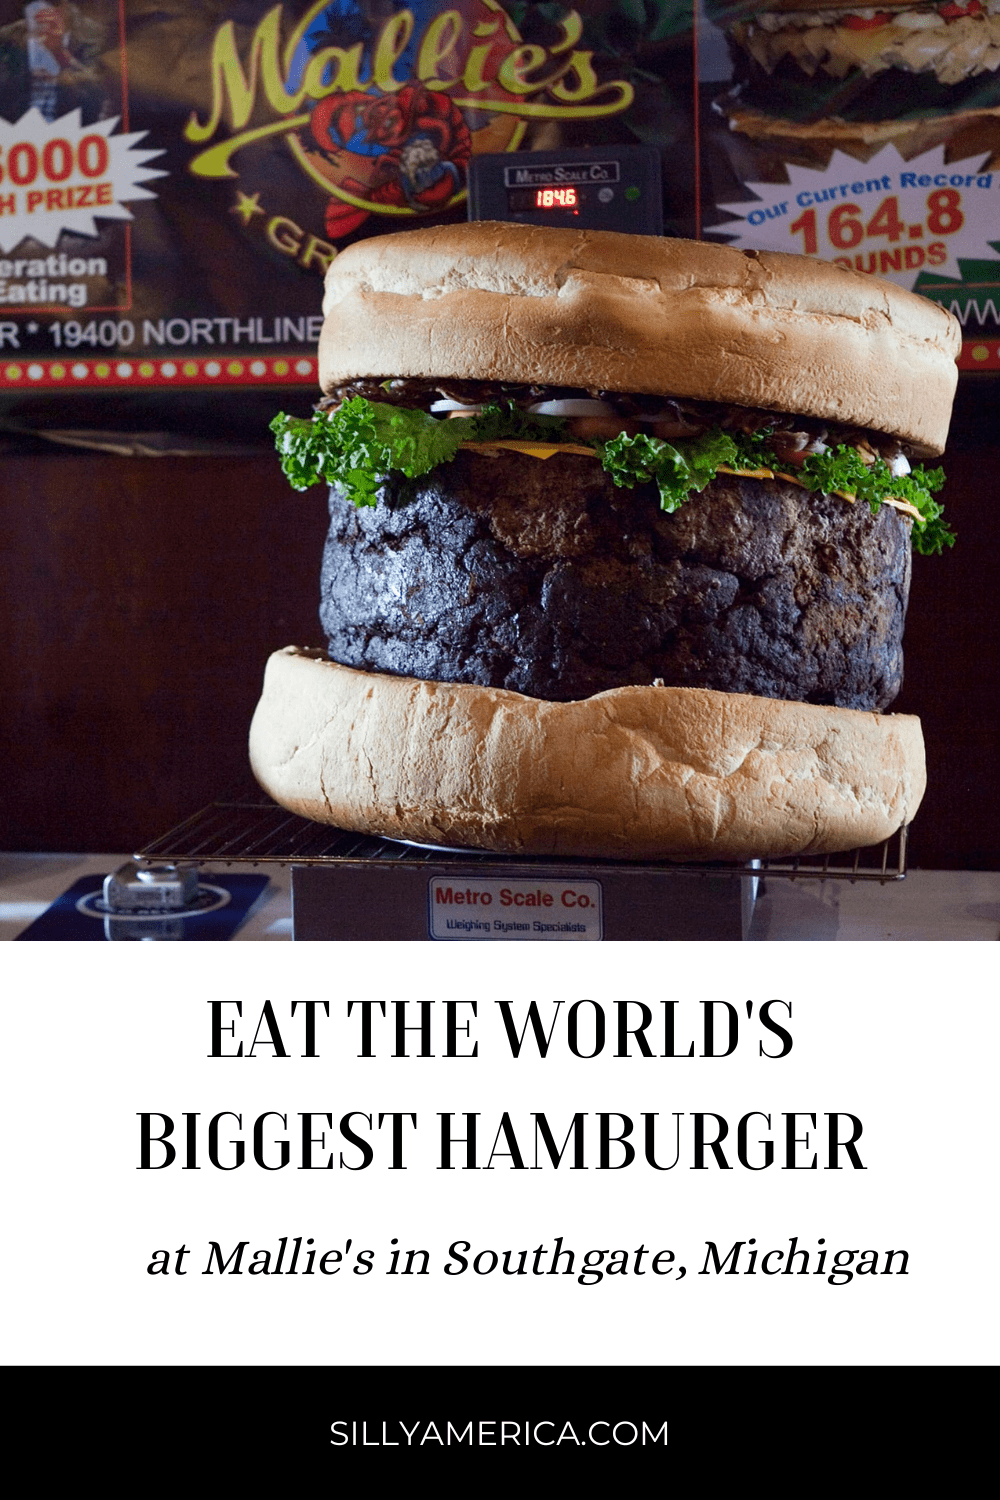 Eat the world's biggest hamburger at Mallie's Sport Bar and Grill in Southgate, Michigan: an 1,800 pound hamburger you can order off the menu!